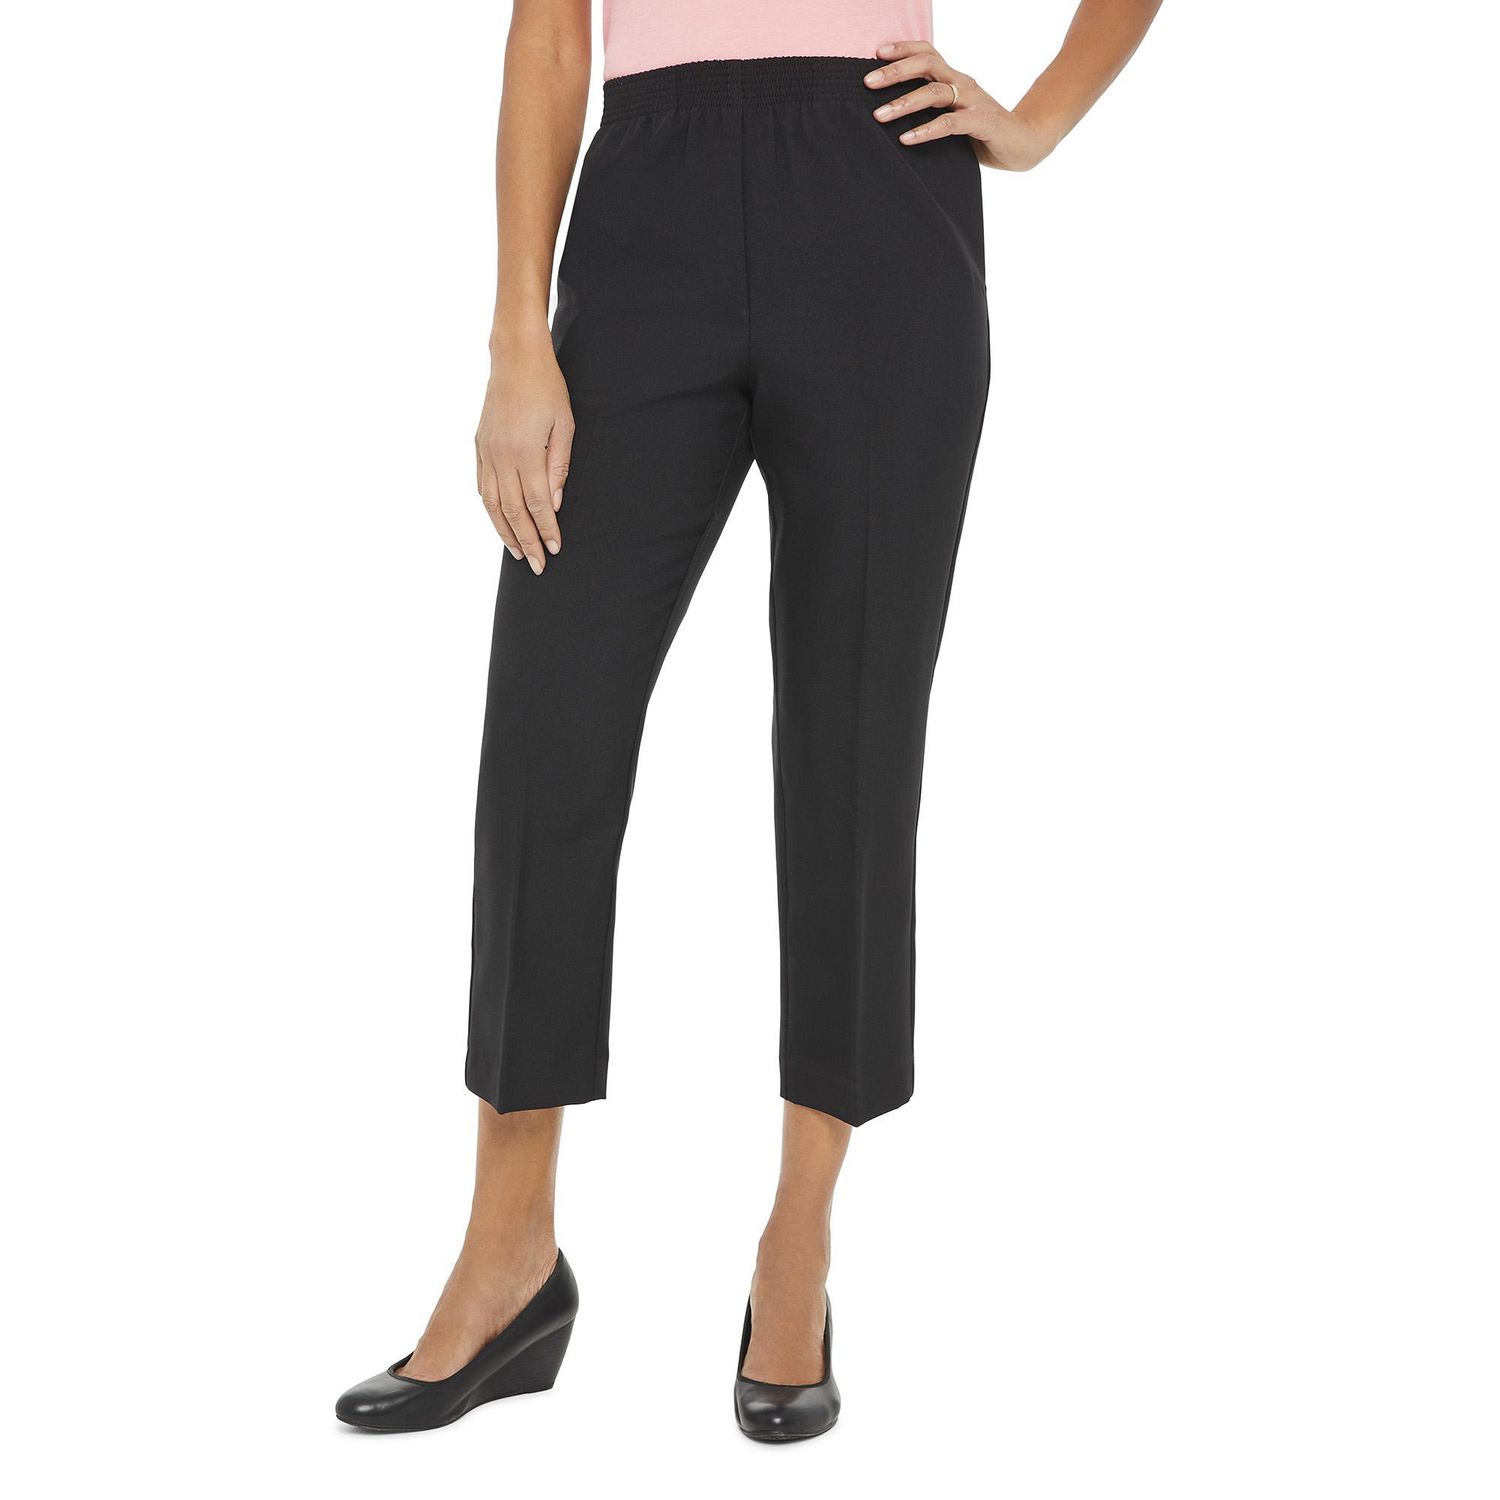 Penmans Petite Women's Polyester Pull-On Pant | Walmart Canada